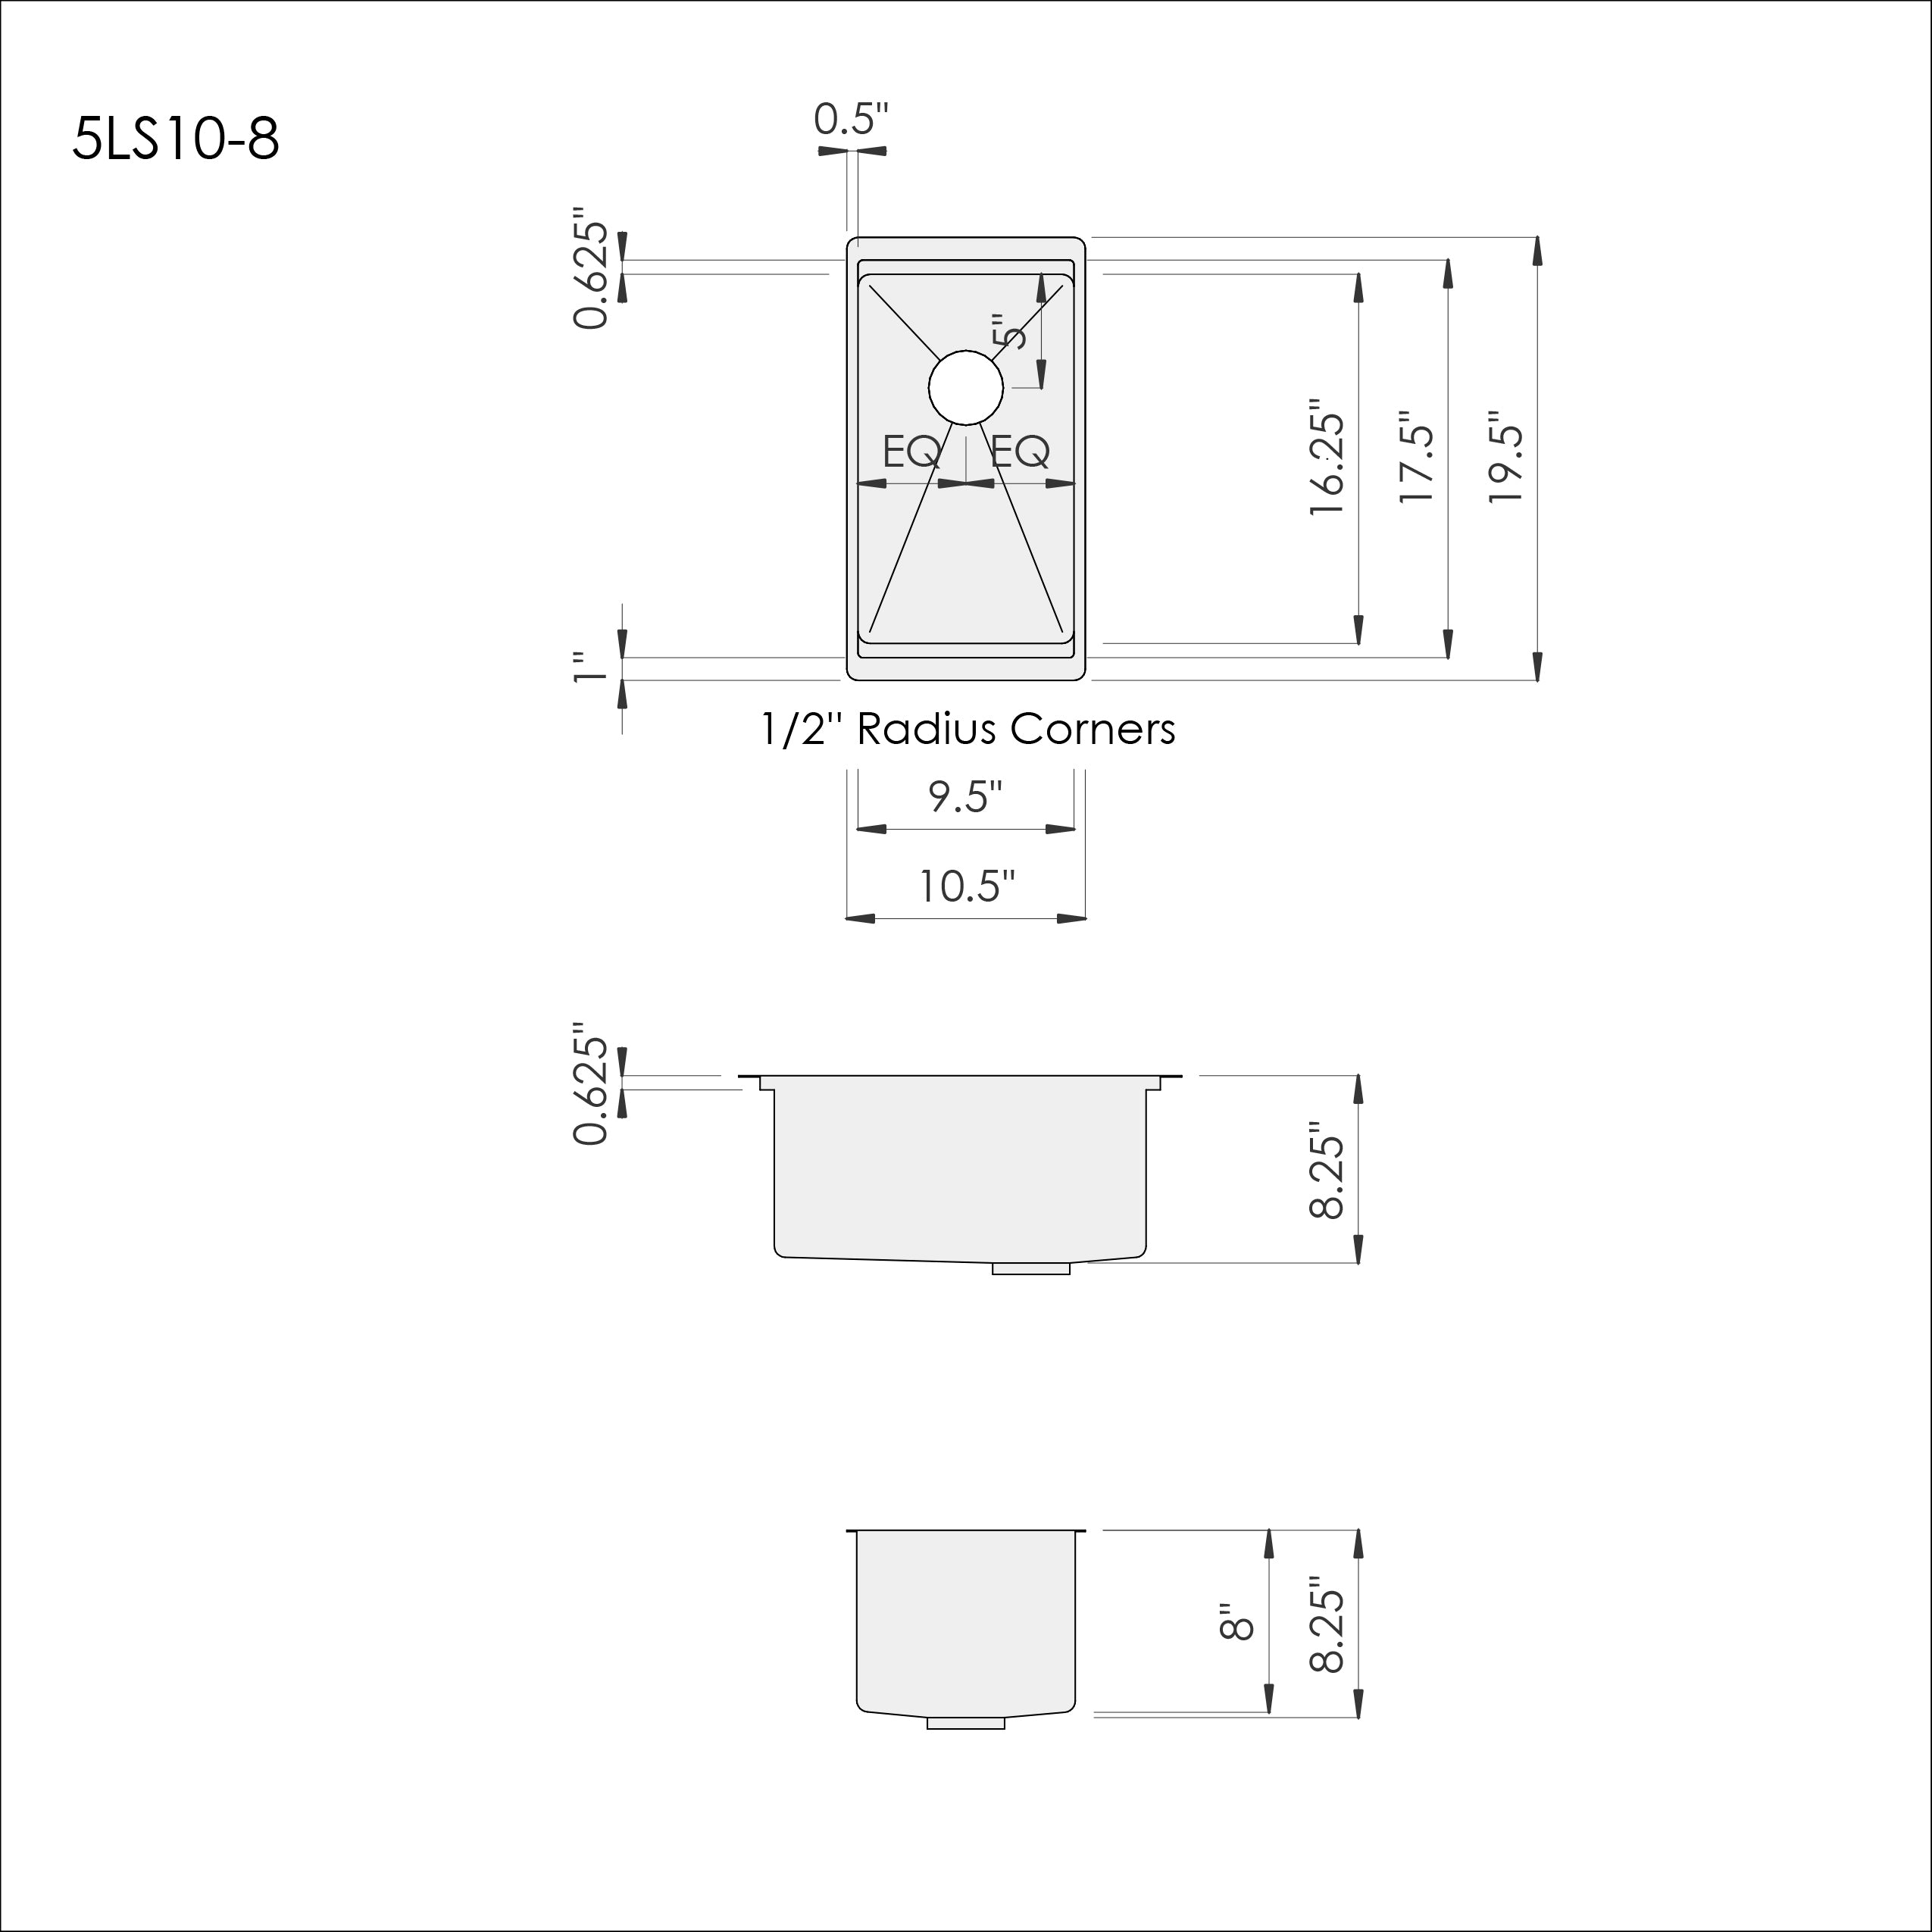 Dimensions for Create Good Sinks 10 inch stainless steel undermount workstation sink. Great size sink for bar, prep area, or coffee station.